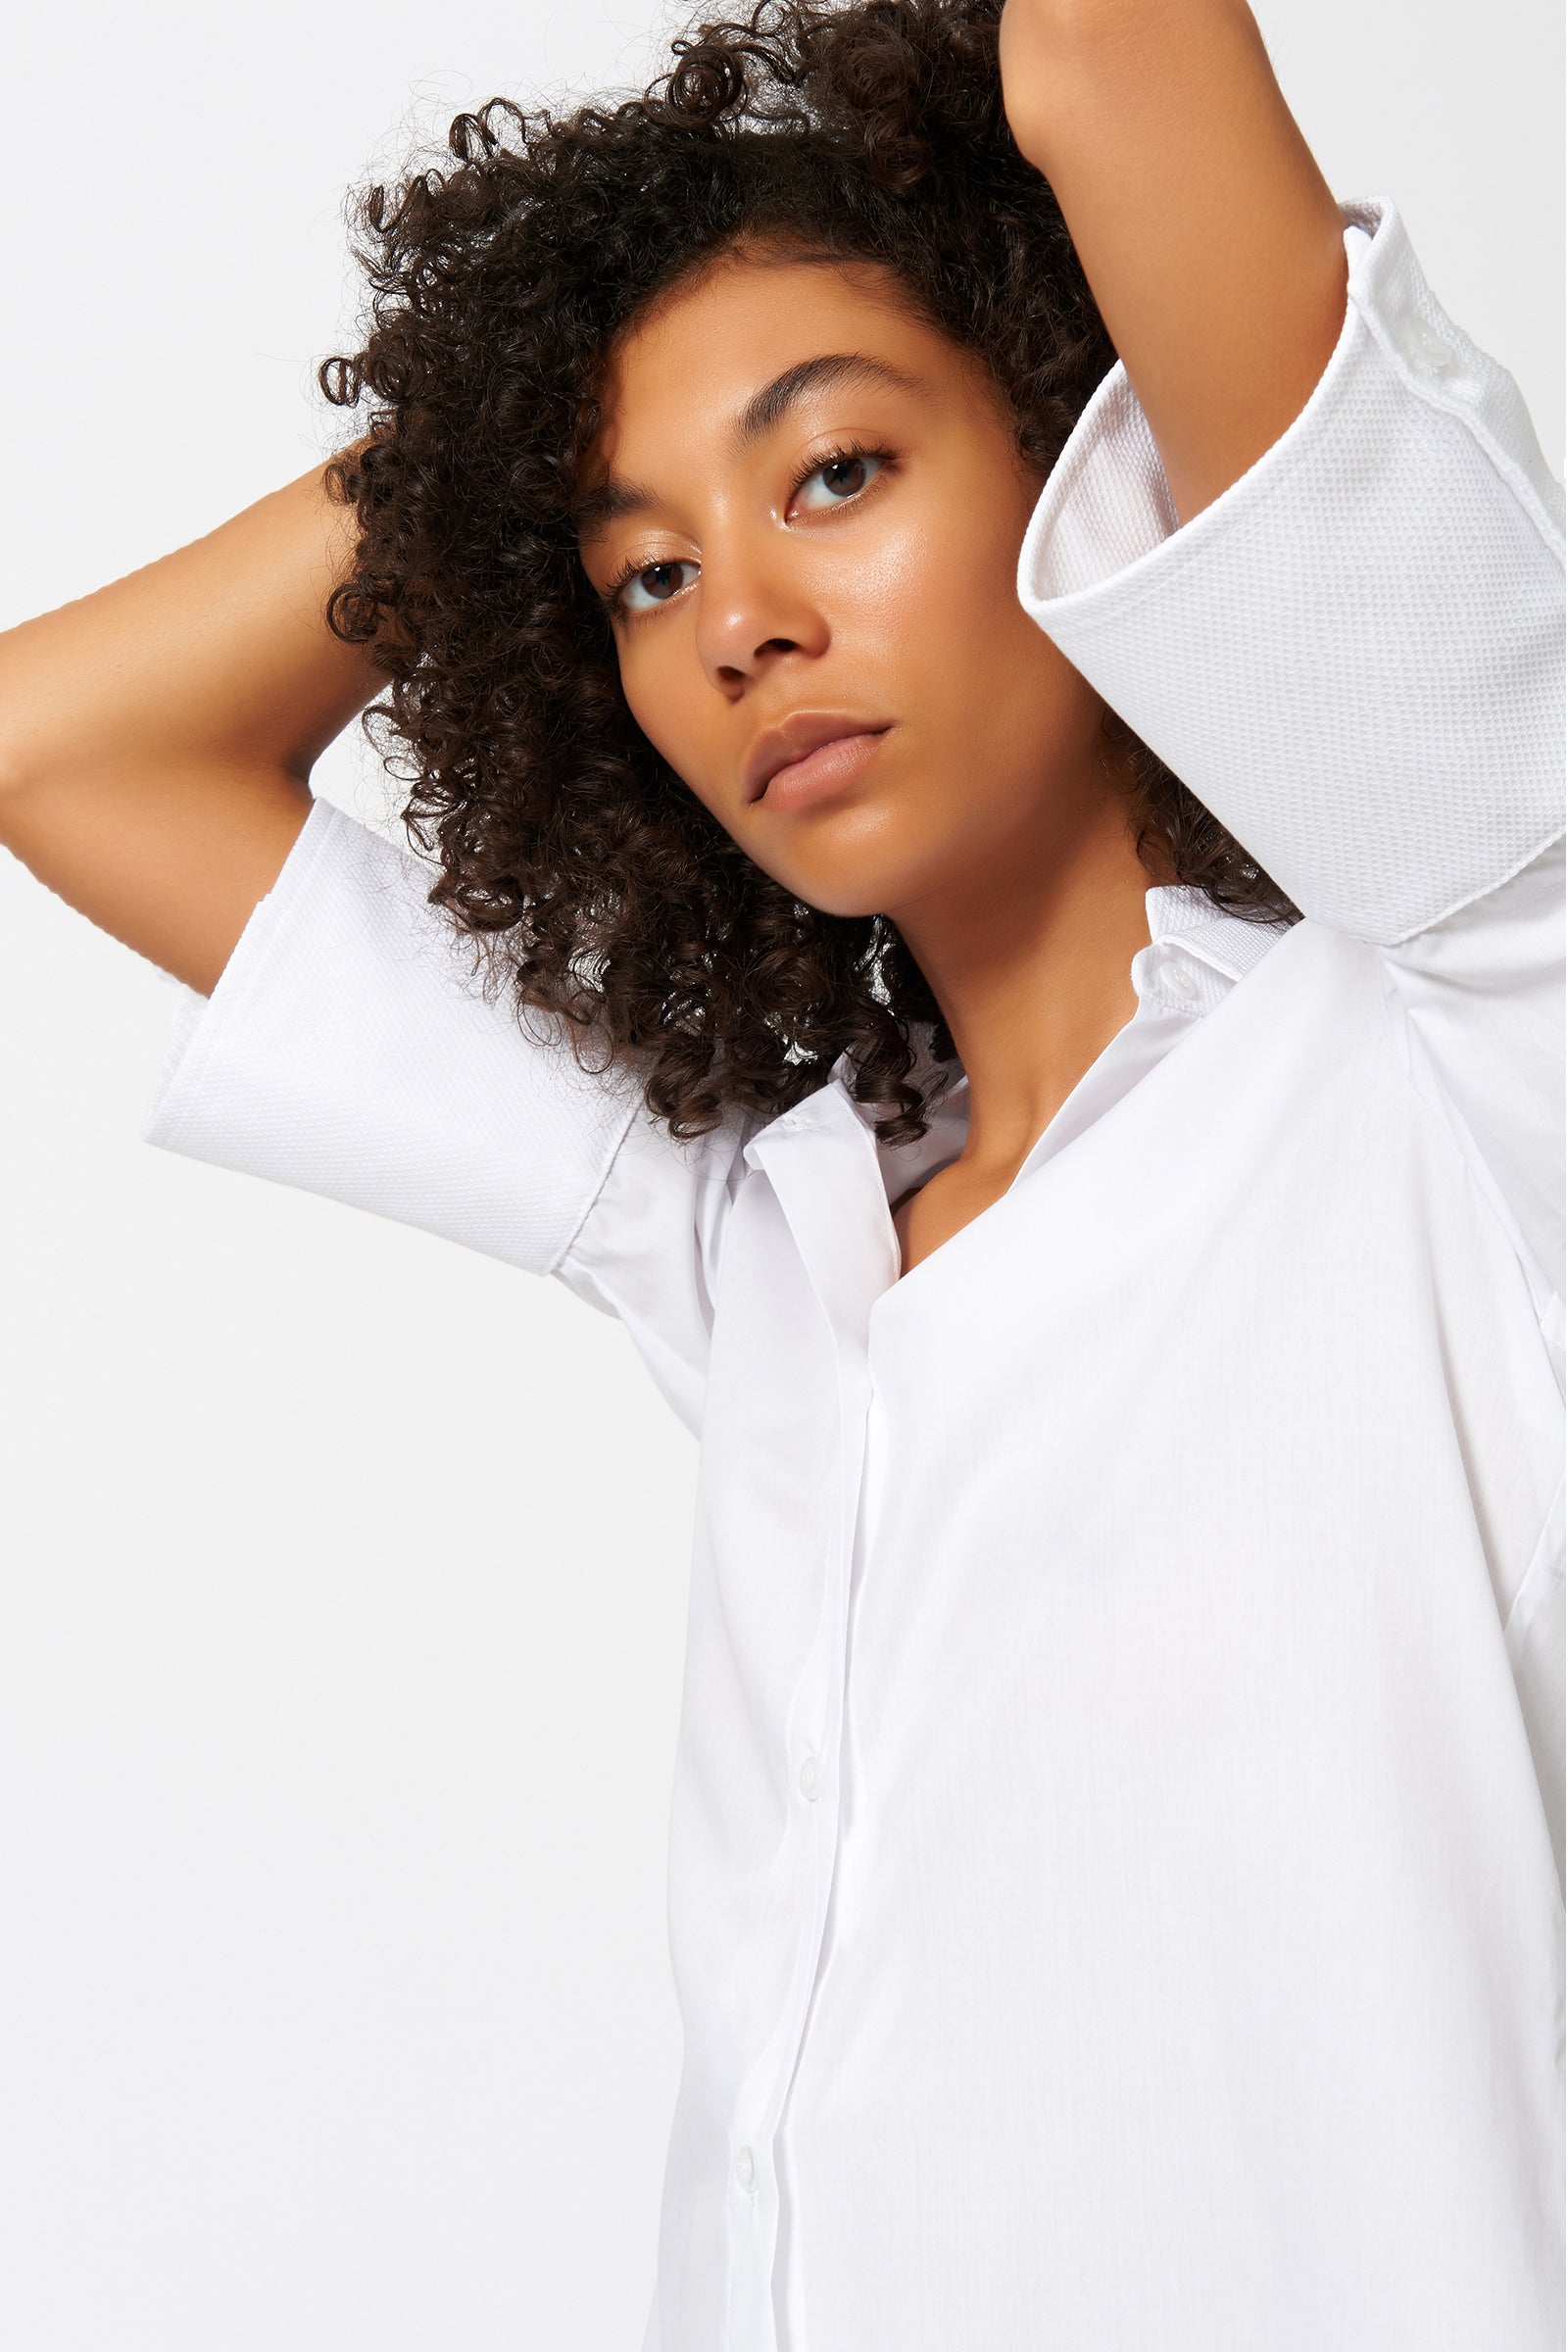 Kal Rieman Double Collar Shirt in White Poplin with Pique on Model Front Detail View